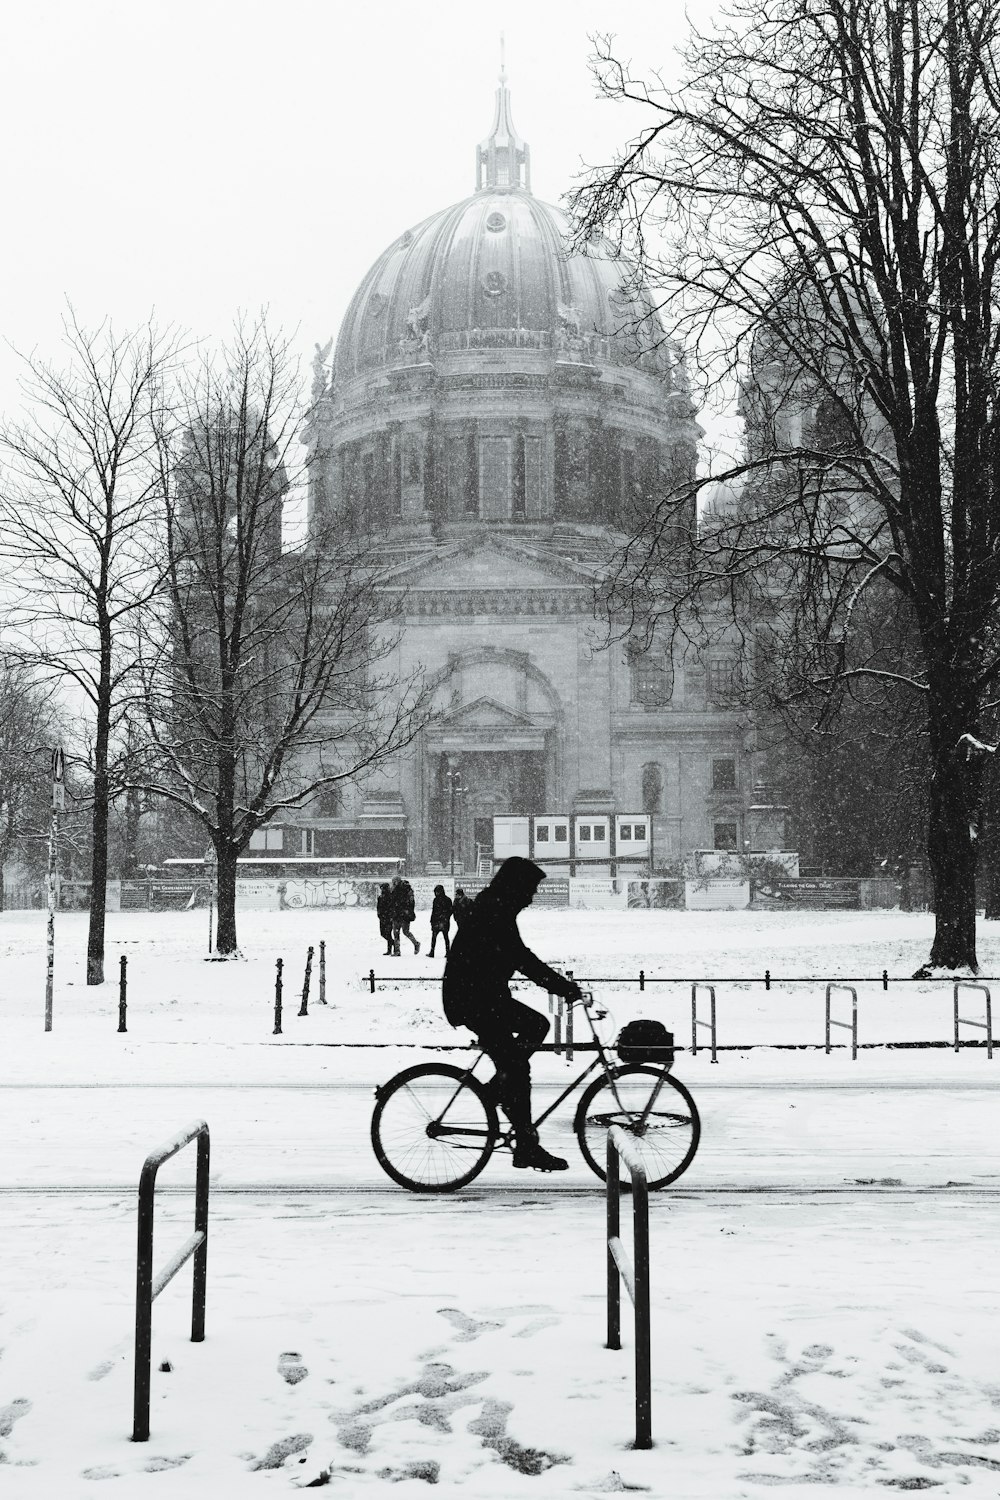 a person riding a bike in the snow